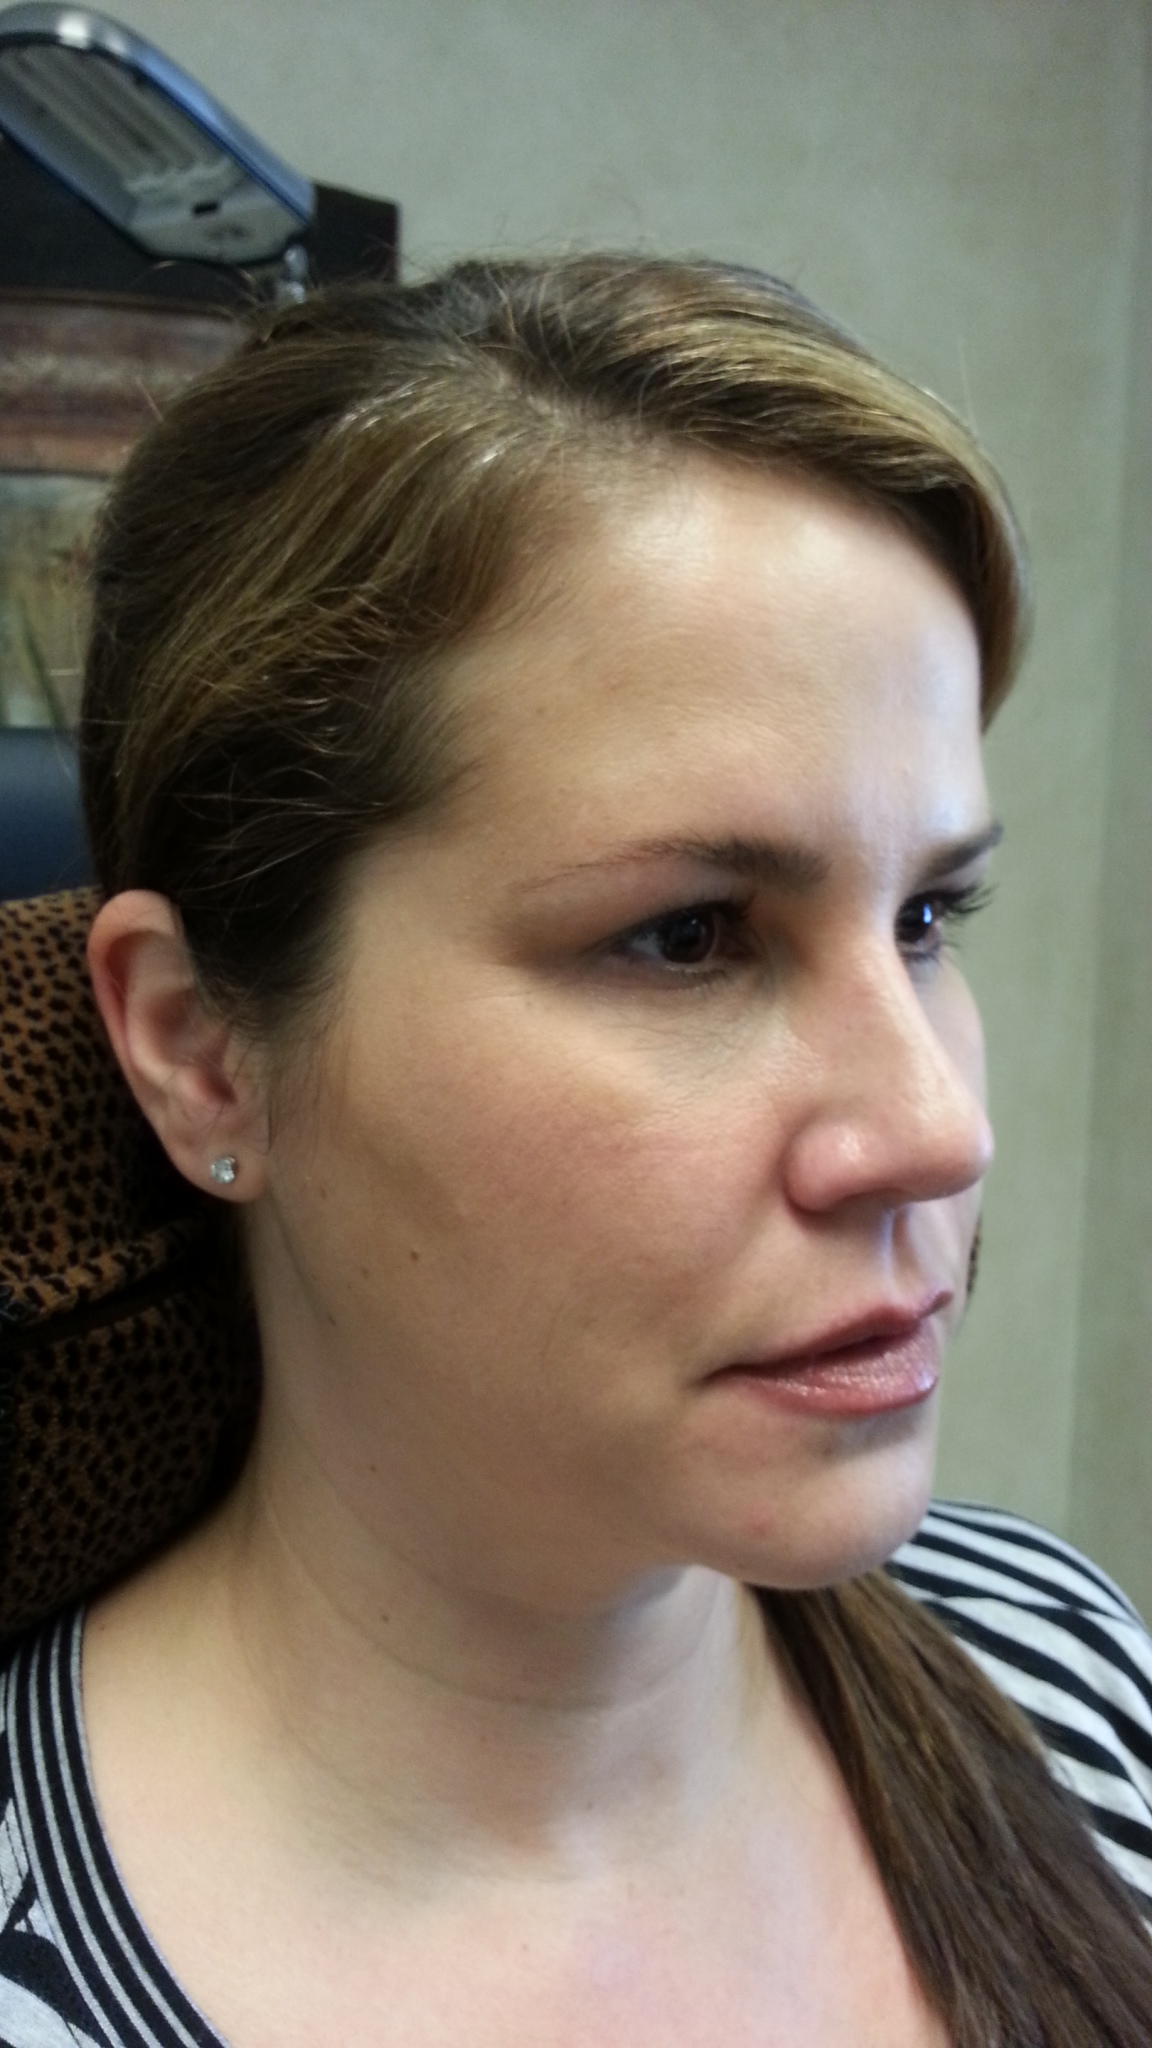 2 cc’s Restylane in the tear troughs and 3 cc’s Restylane Lyft in the cheeks, corners of the mouth, and jowls. (after)